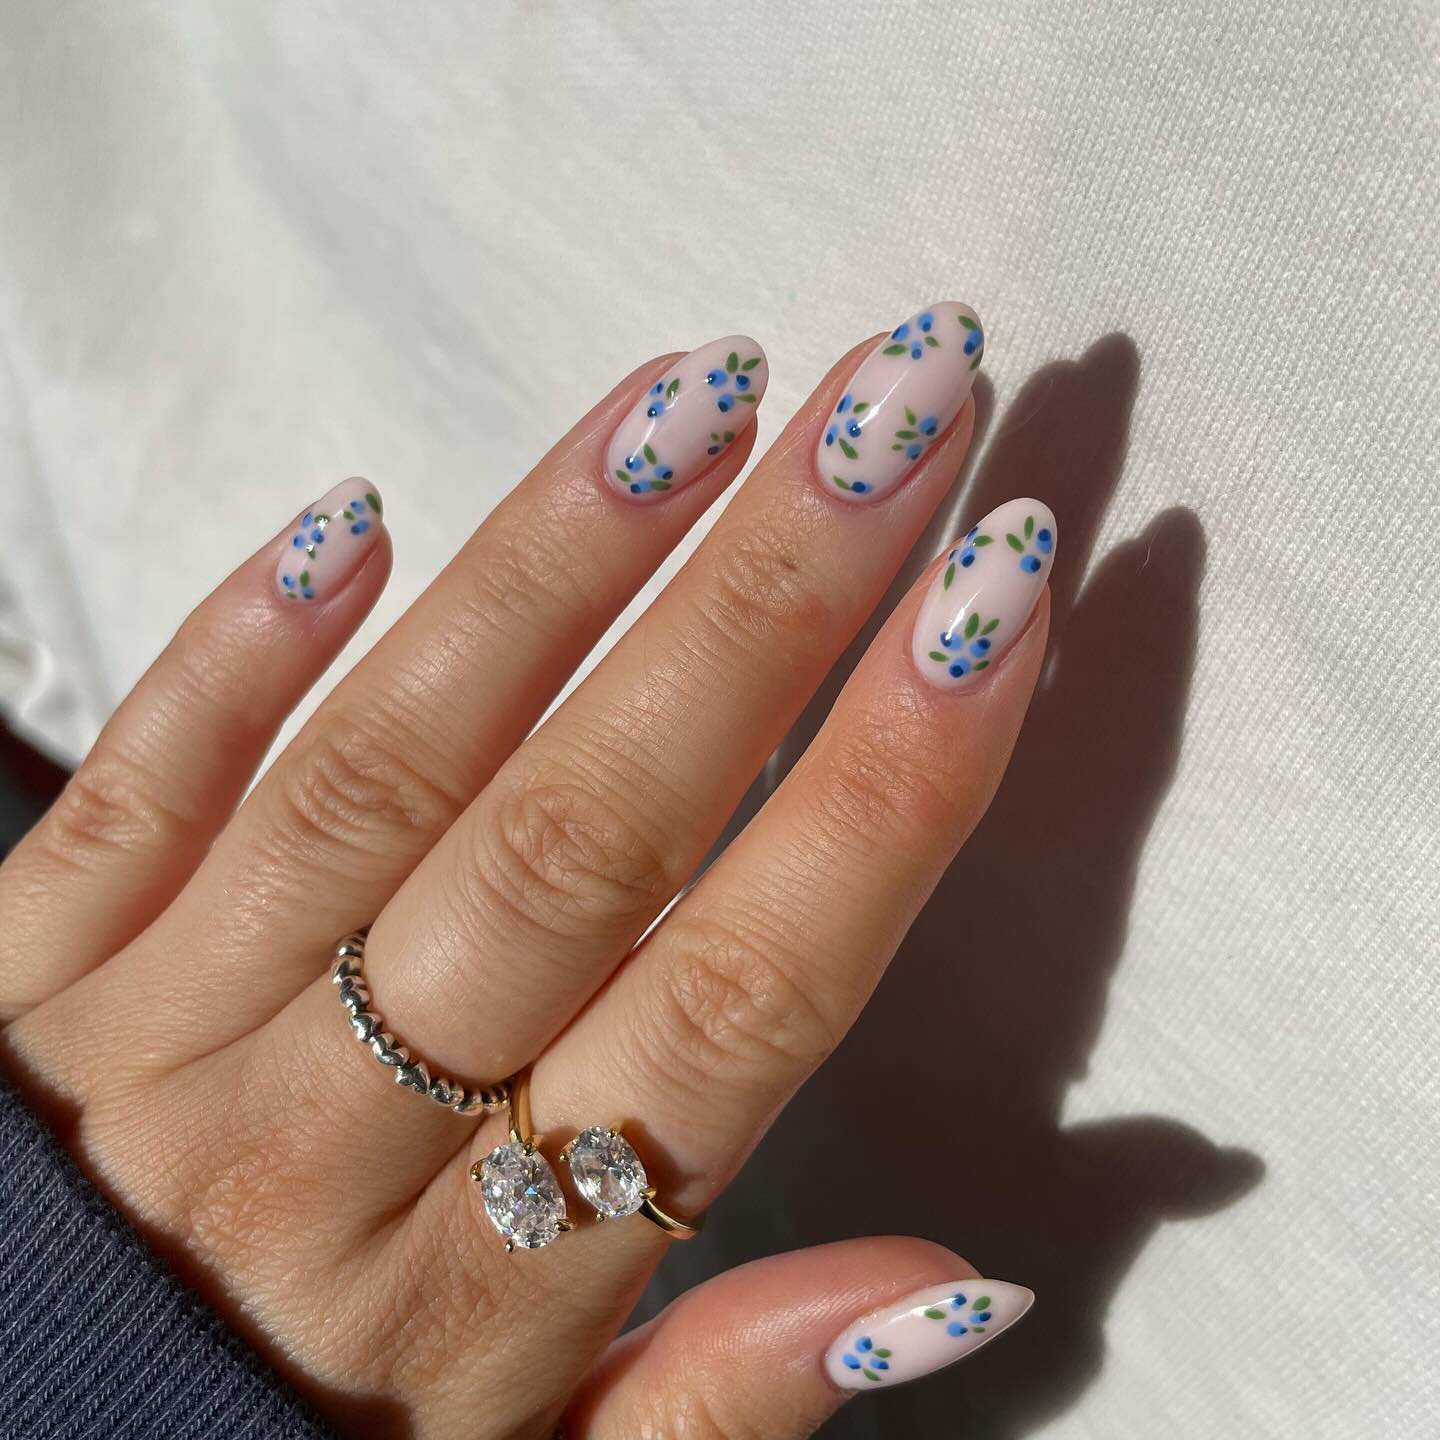 100+ Short Nail Designs You’ll Want To Try This Year images 62